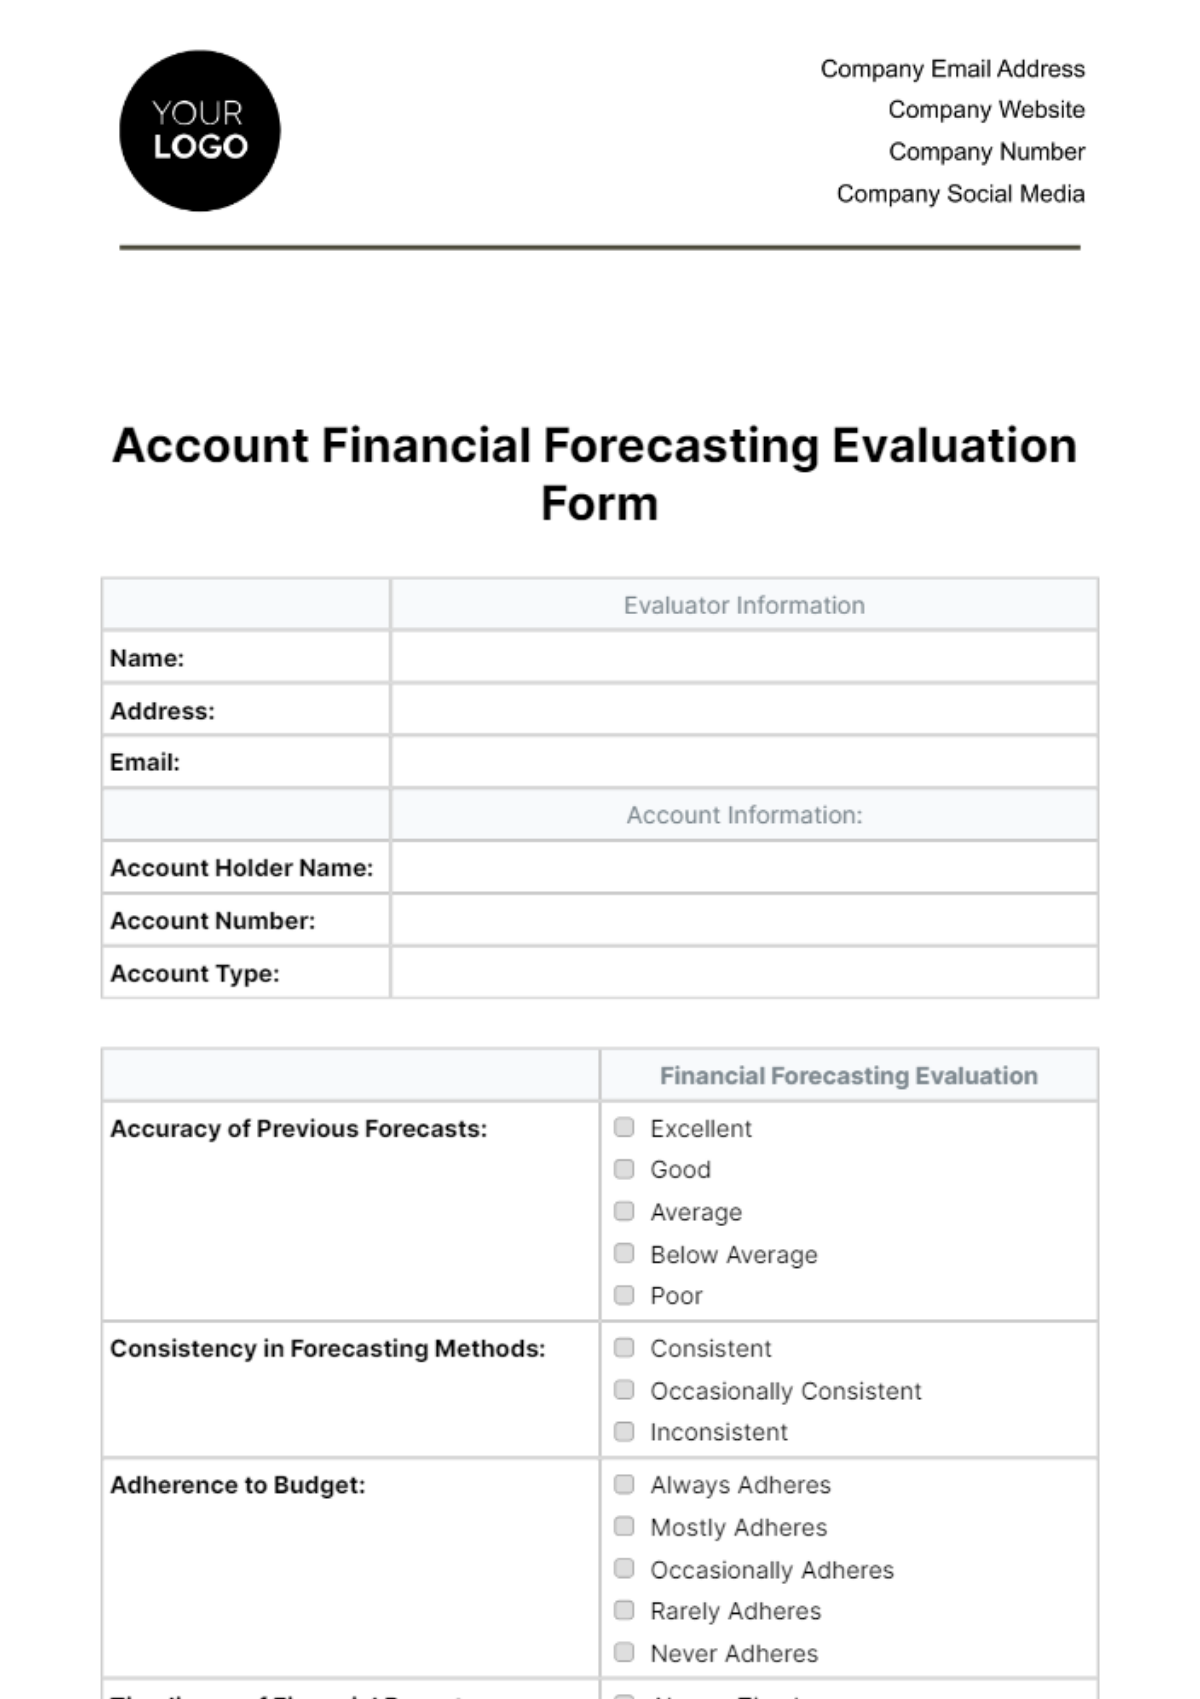 Account Financial Forecasting Evaluation Form Template